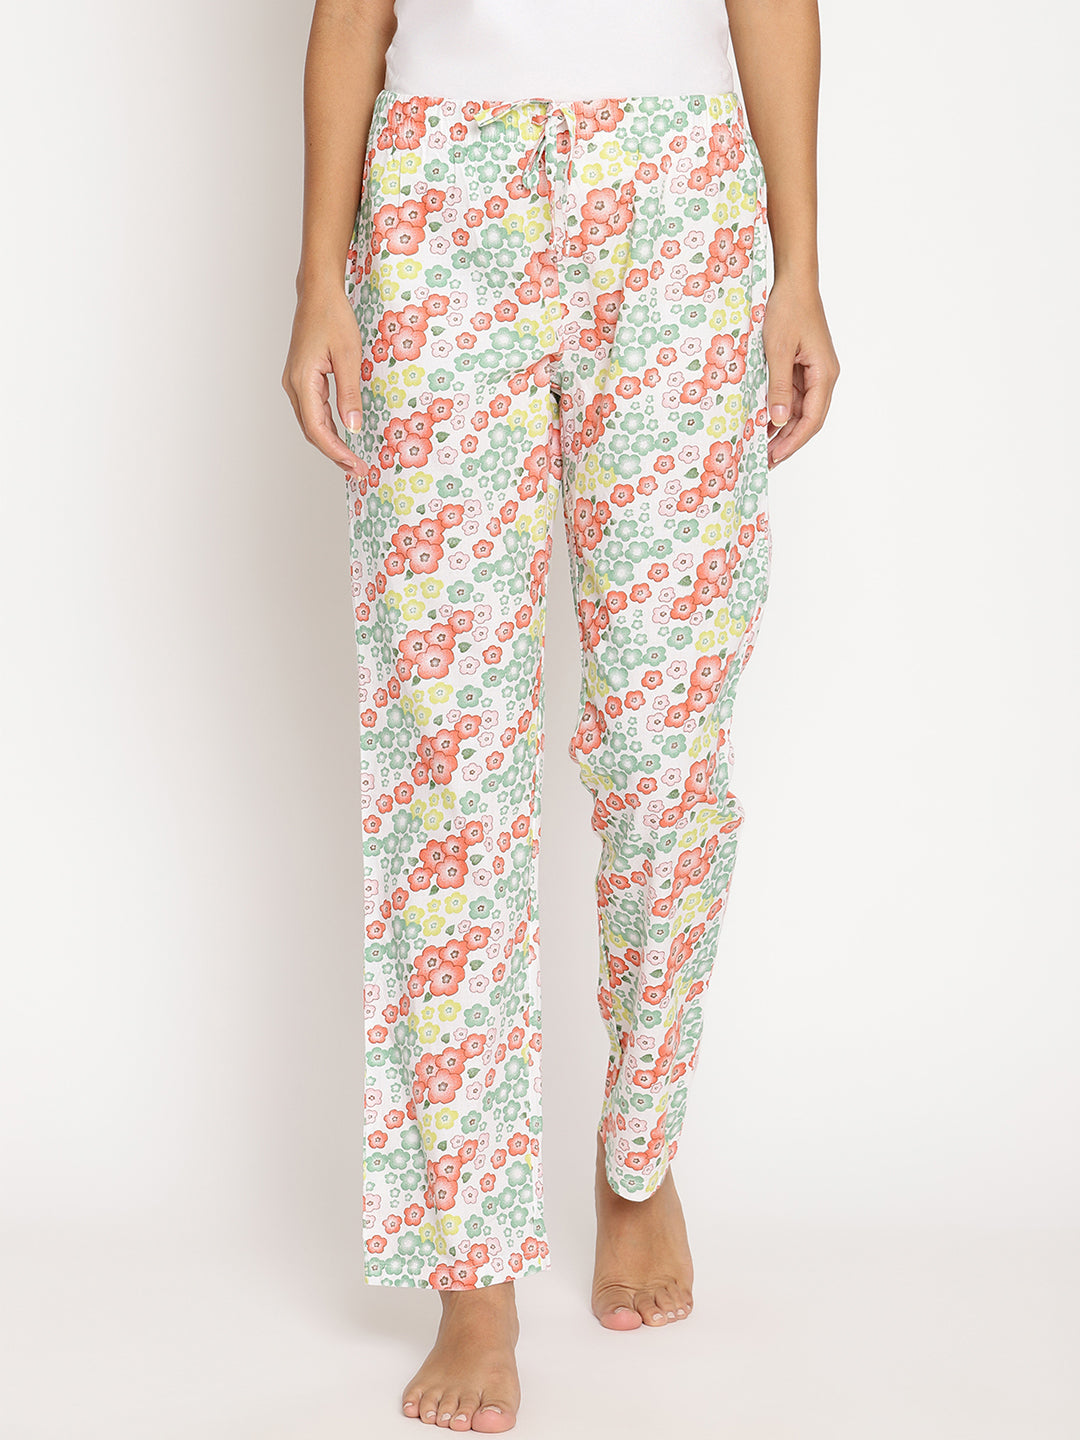 Jockey Women's Micro Modal Cotton Relaxed Fit Printed Pajama – Online  Shopping site in India